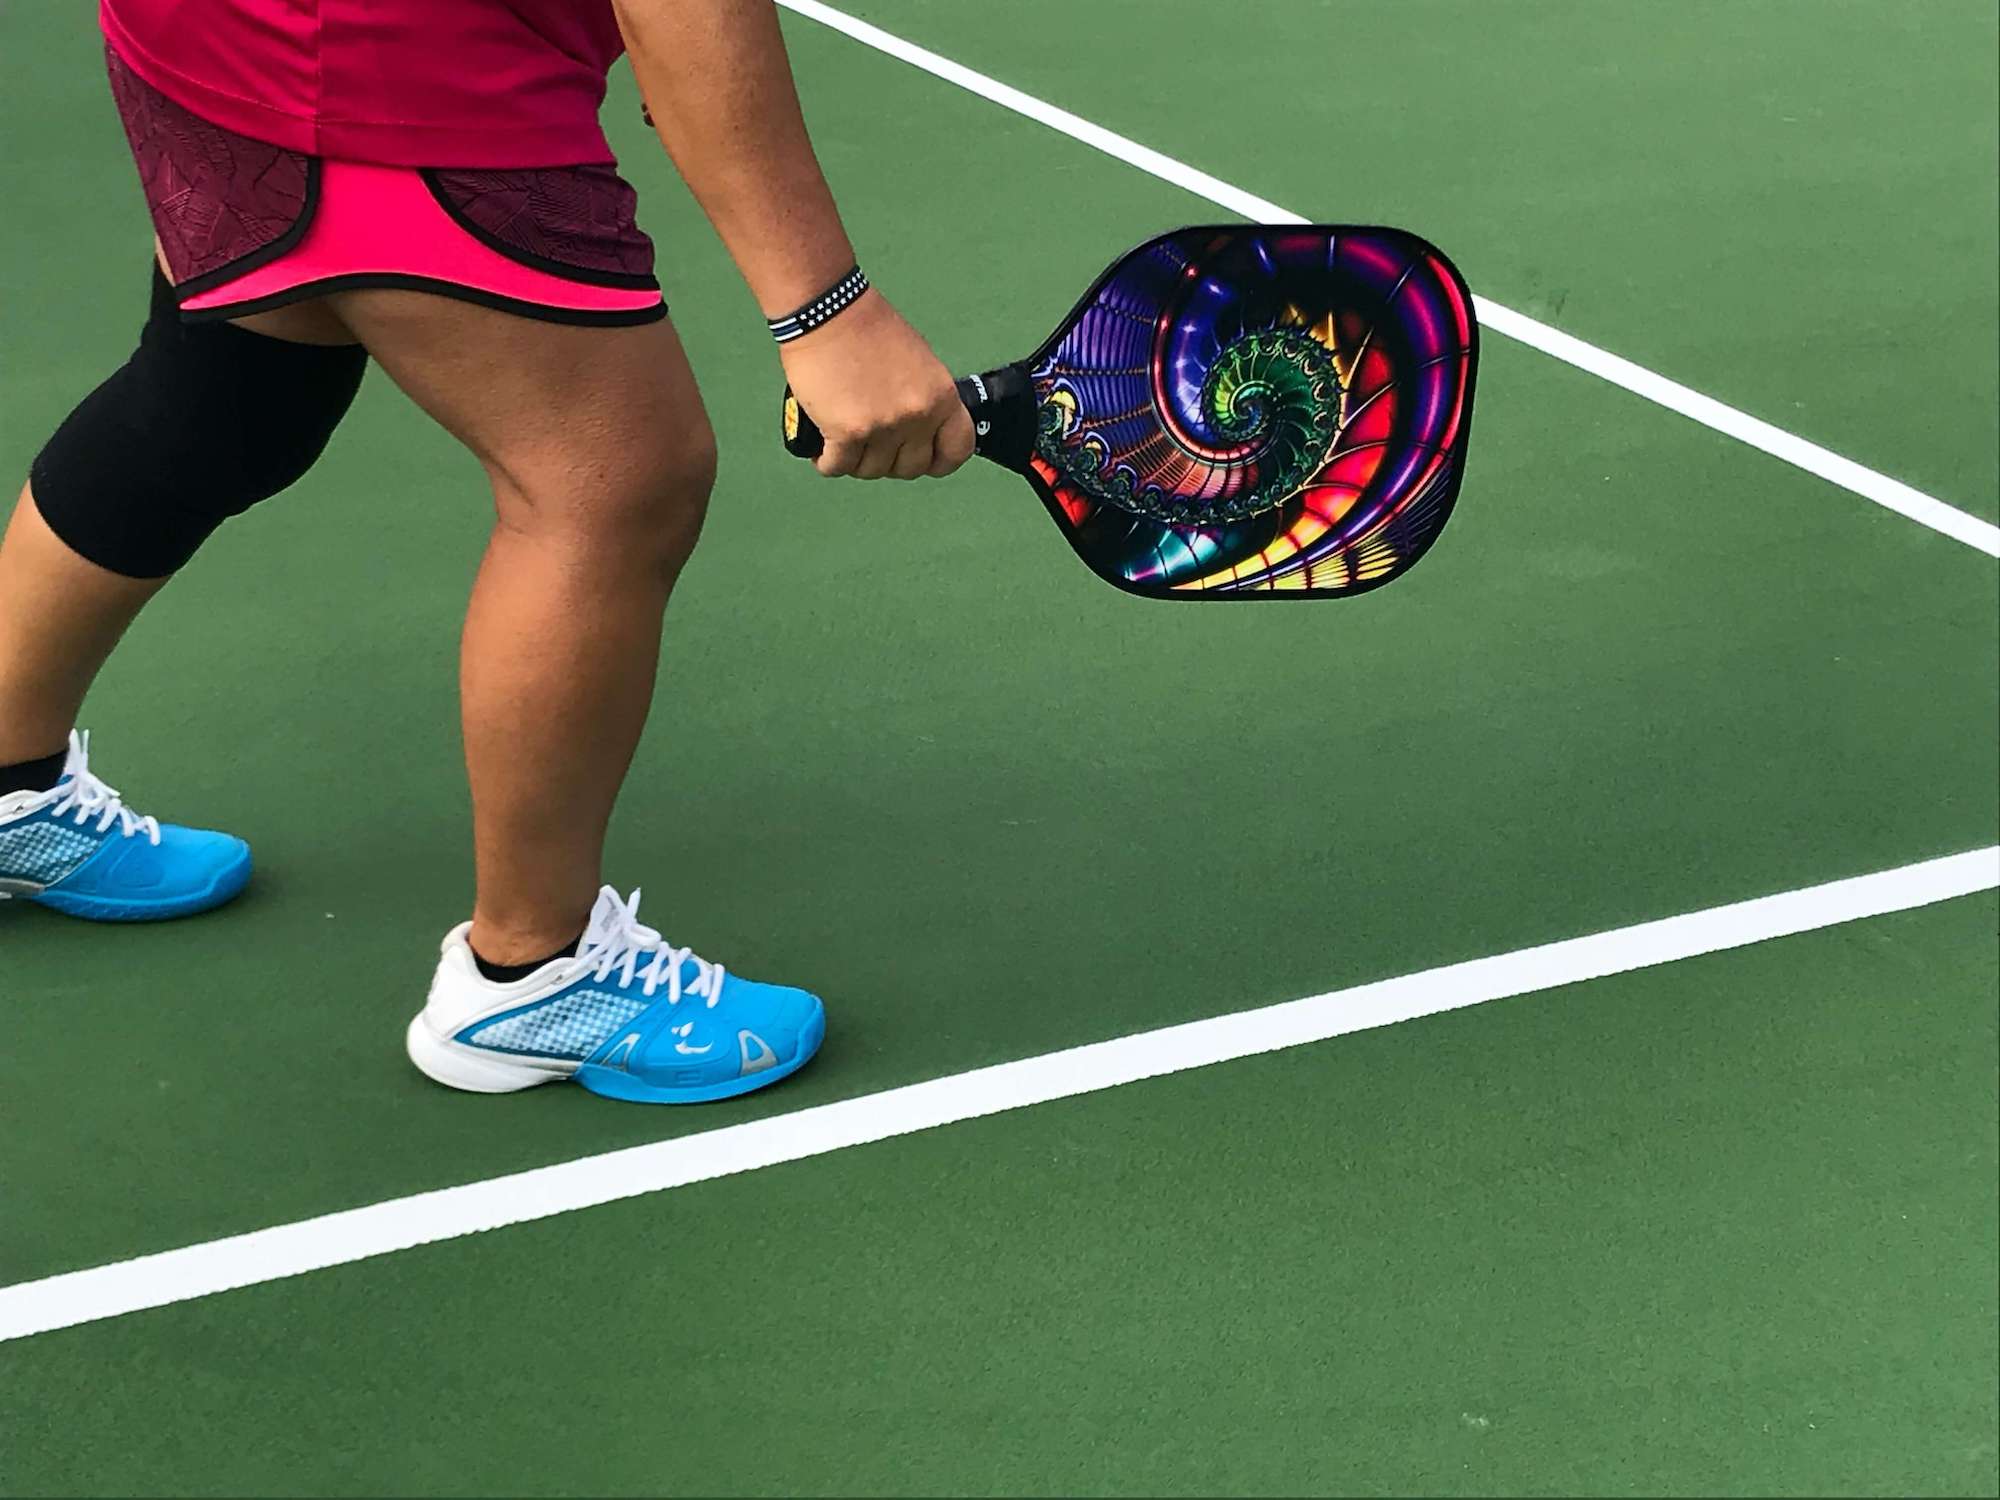 What Paddles Do Pro Pickleball Players Use